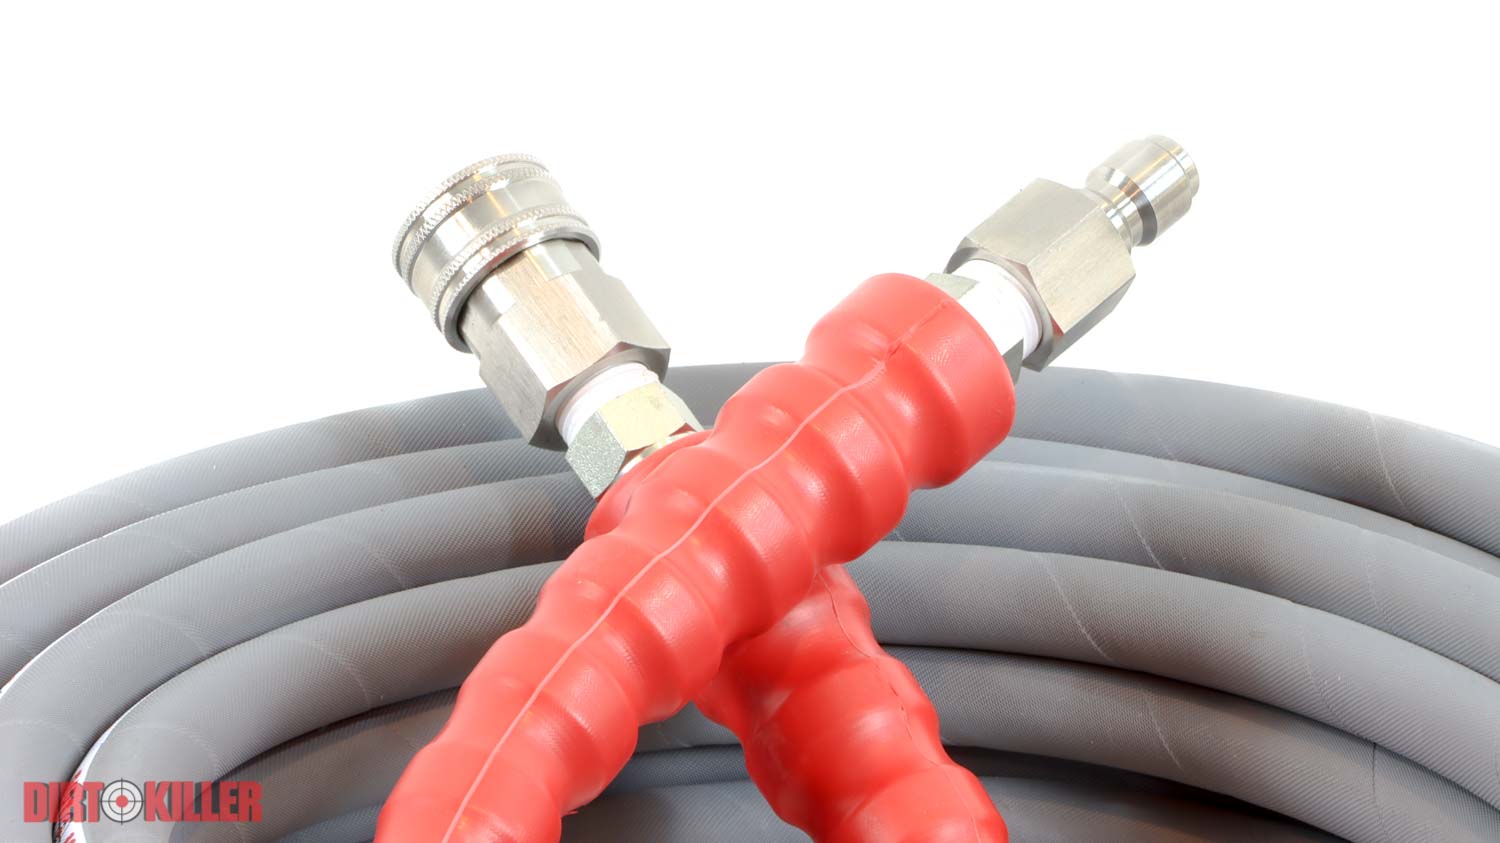 Stainless steel quick disconnects. 100 FT grey non-marking high pressure hose